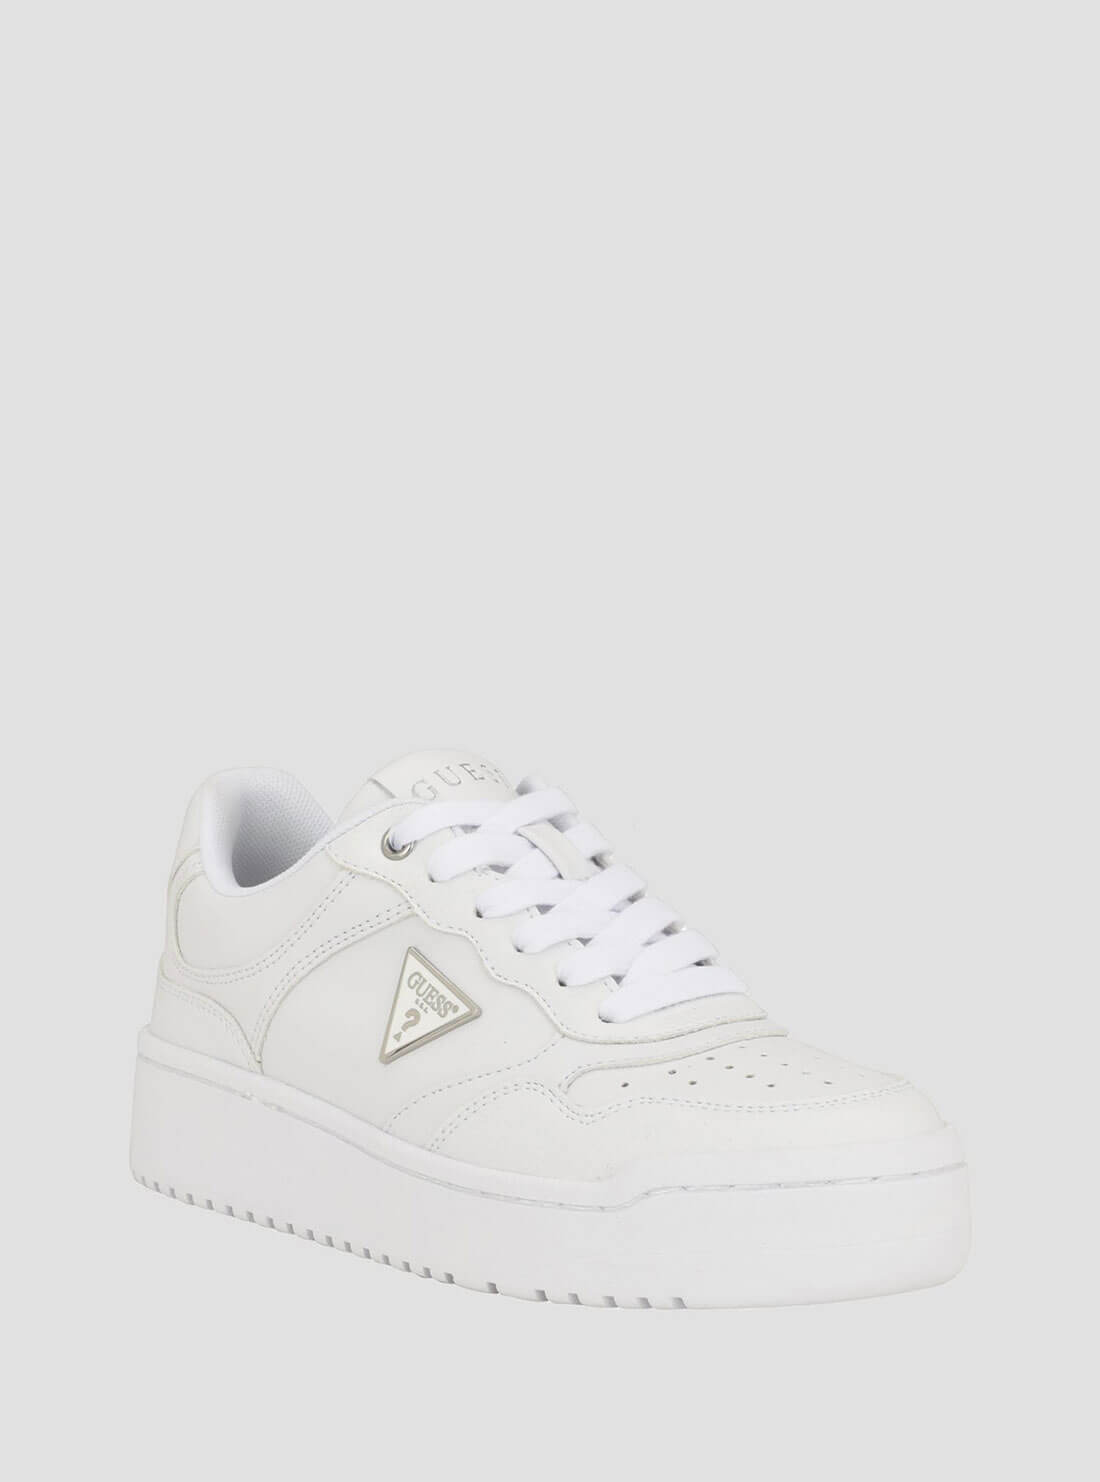 White Miram Sneakers | GUESS Women's Shoes | front view